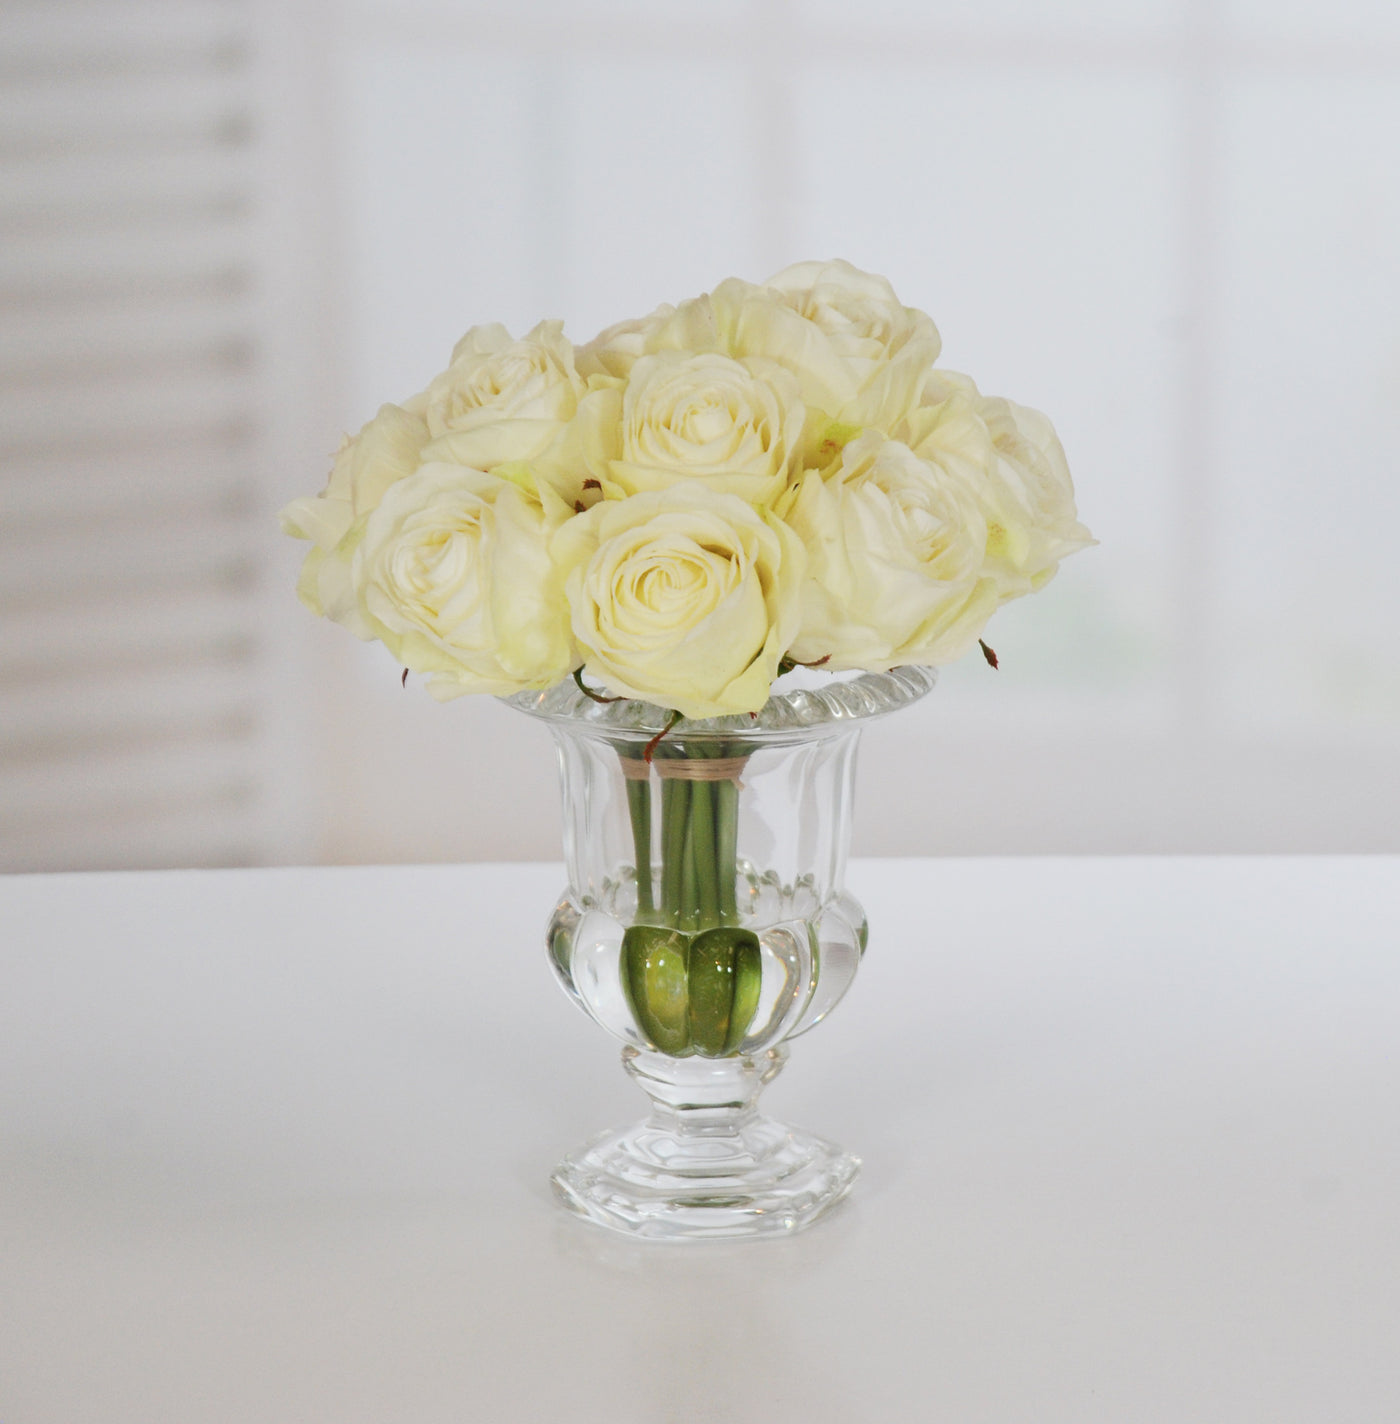 ROSE IN CRYSTAL GLASS 9.5'' (WHI010-WH) - Winward Home faux floral arrangements